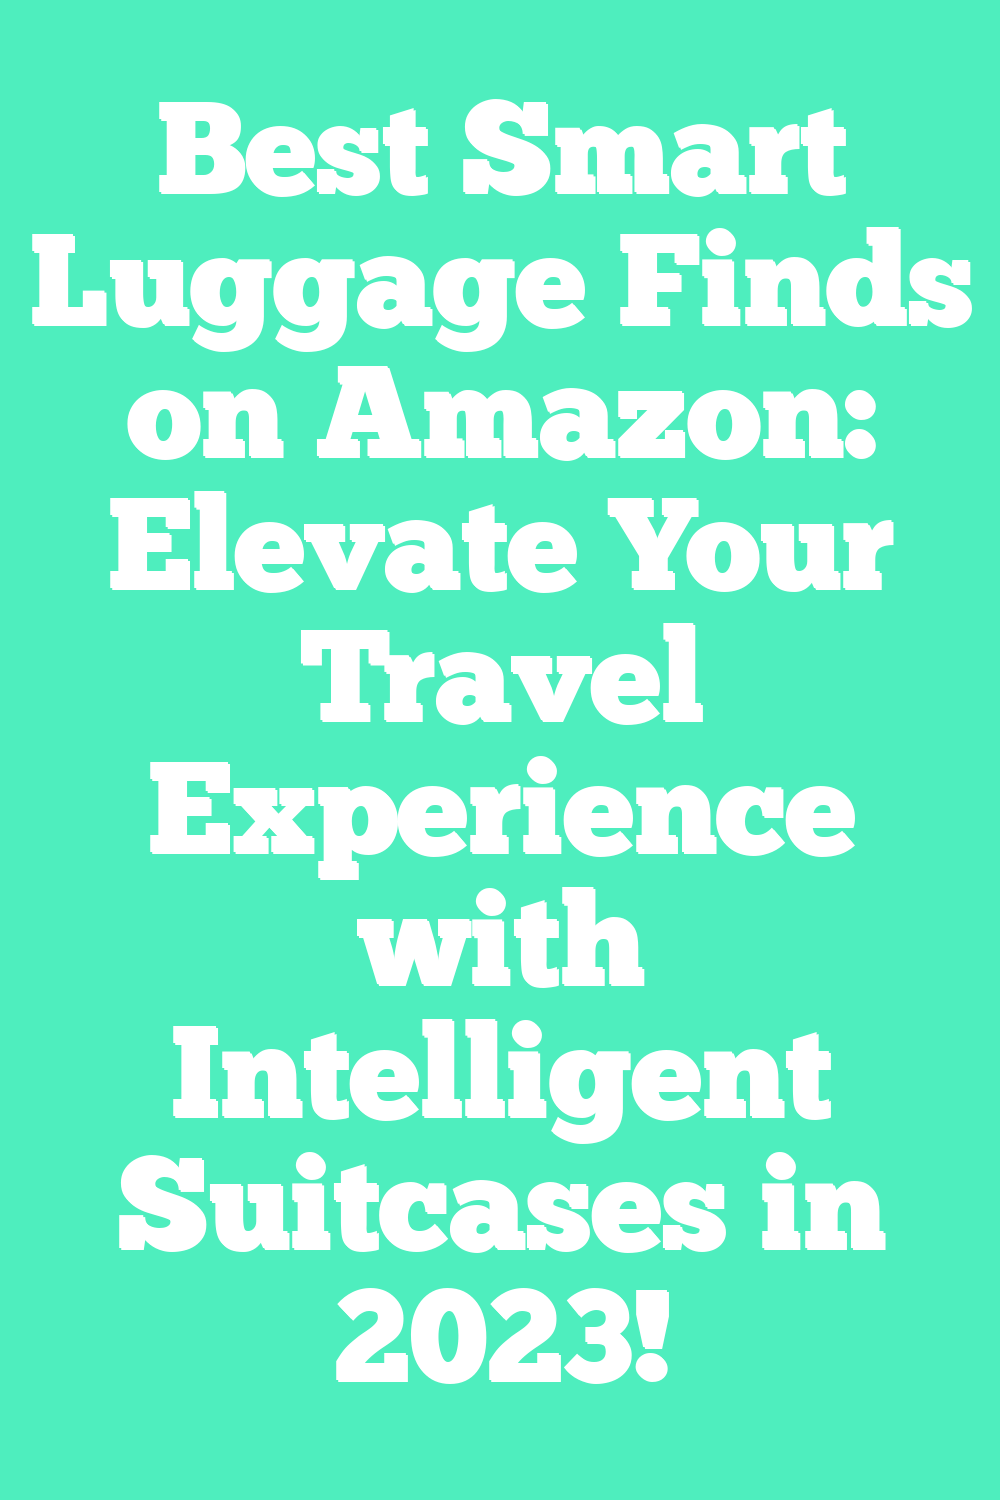 Best Smart Luggage Finds on Amazon: Elevate Your Travel Experience with Intelligent Suitcases in 2023!